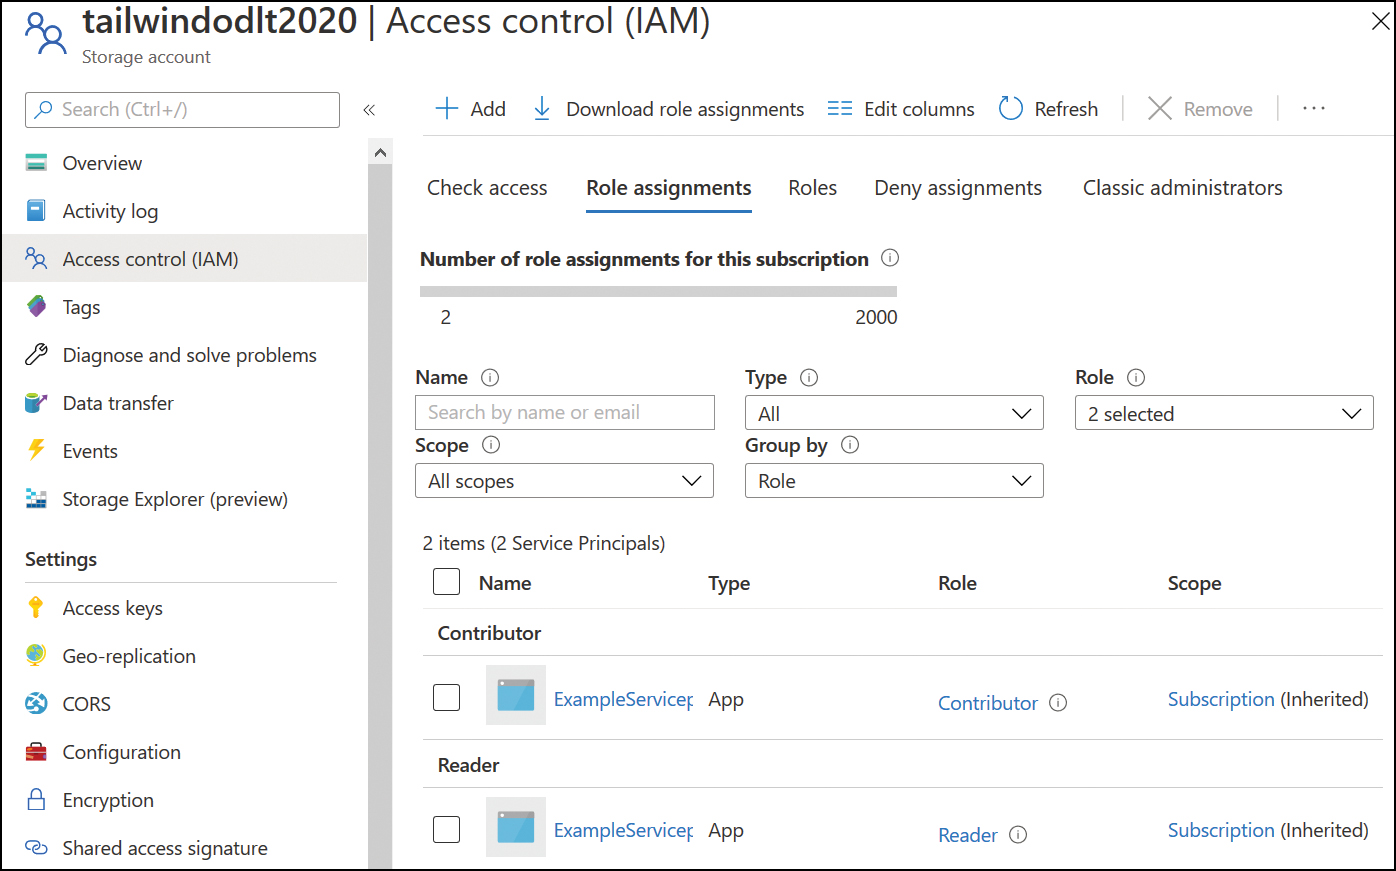 This screenshot shows a storage account's Access Control (IAM) Role Assignments page.